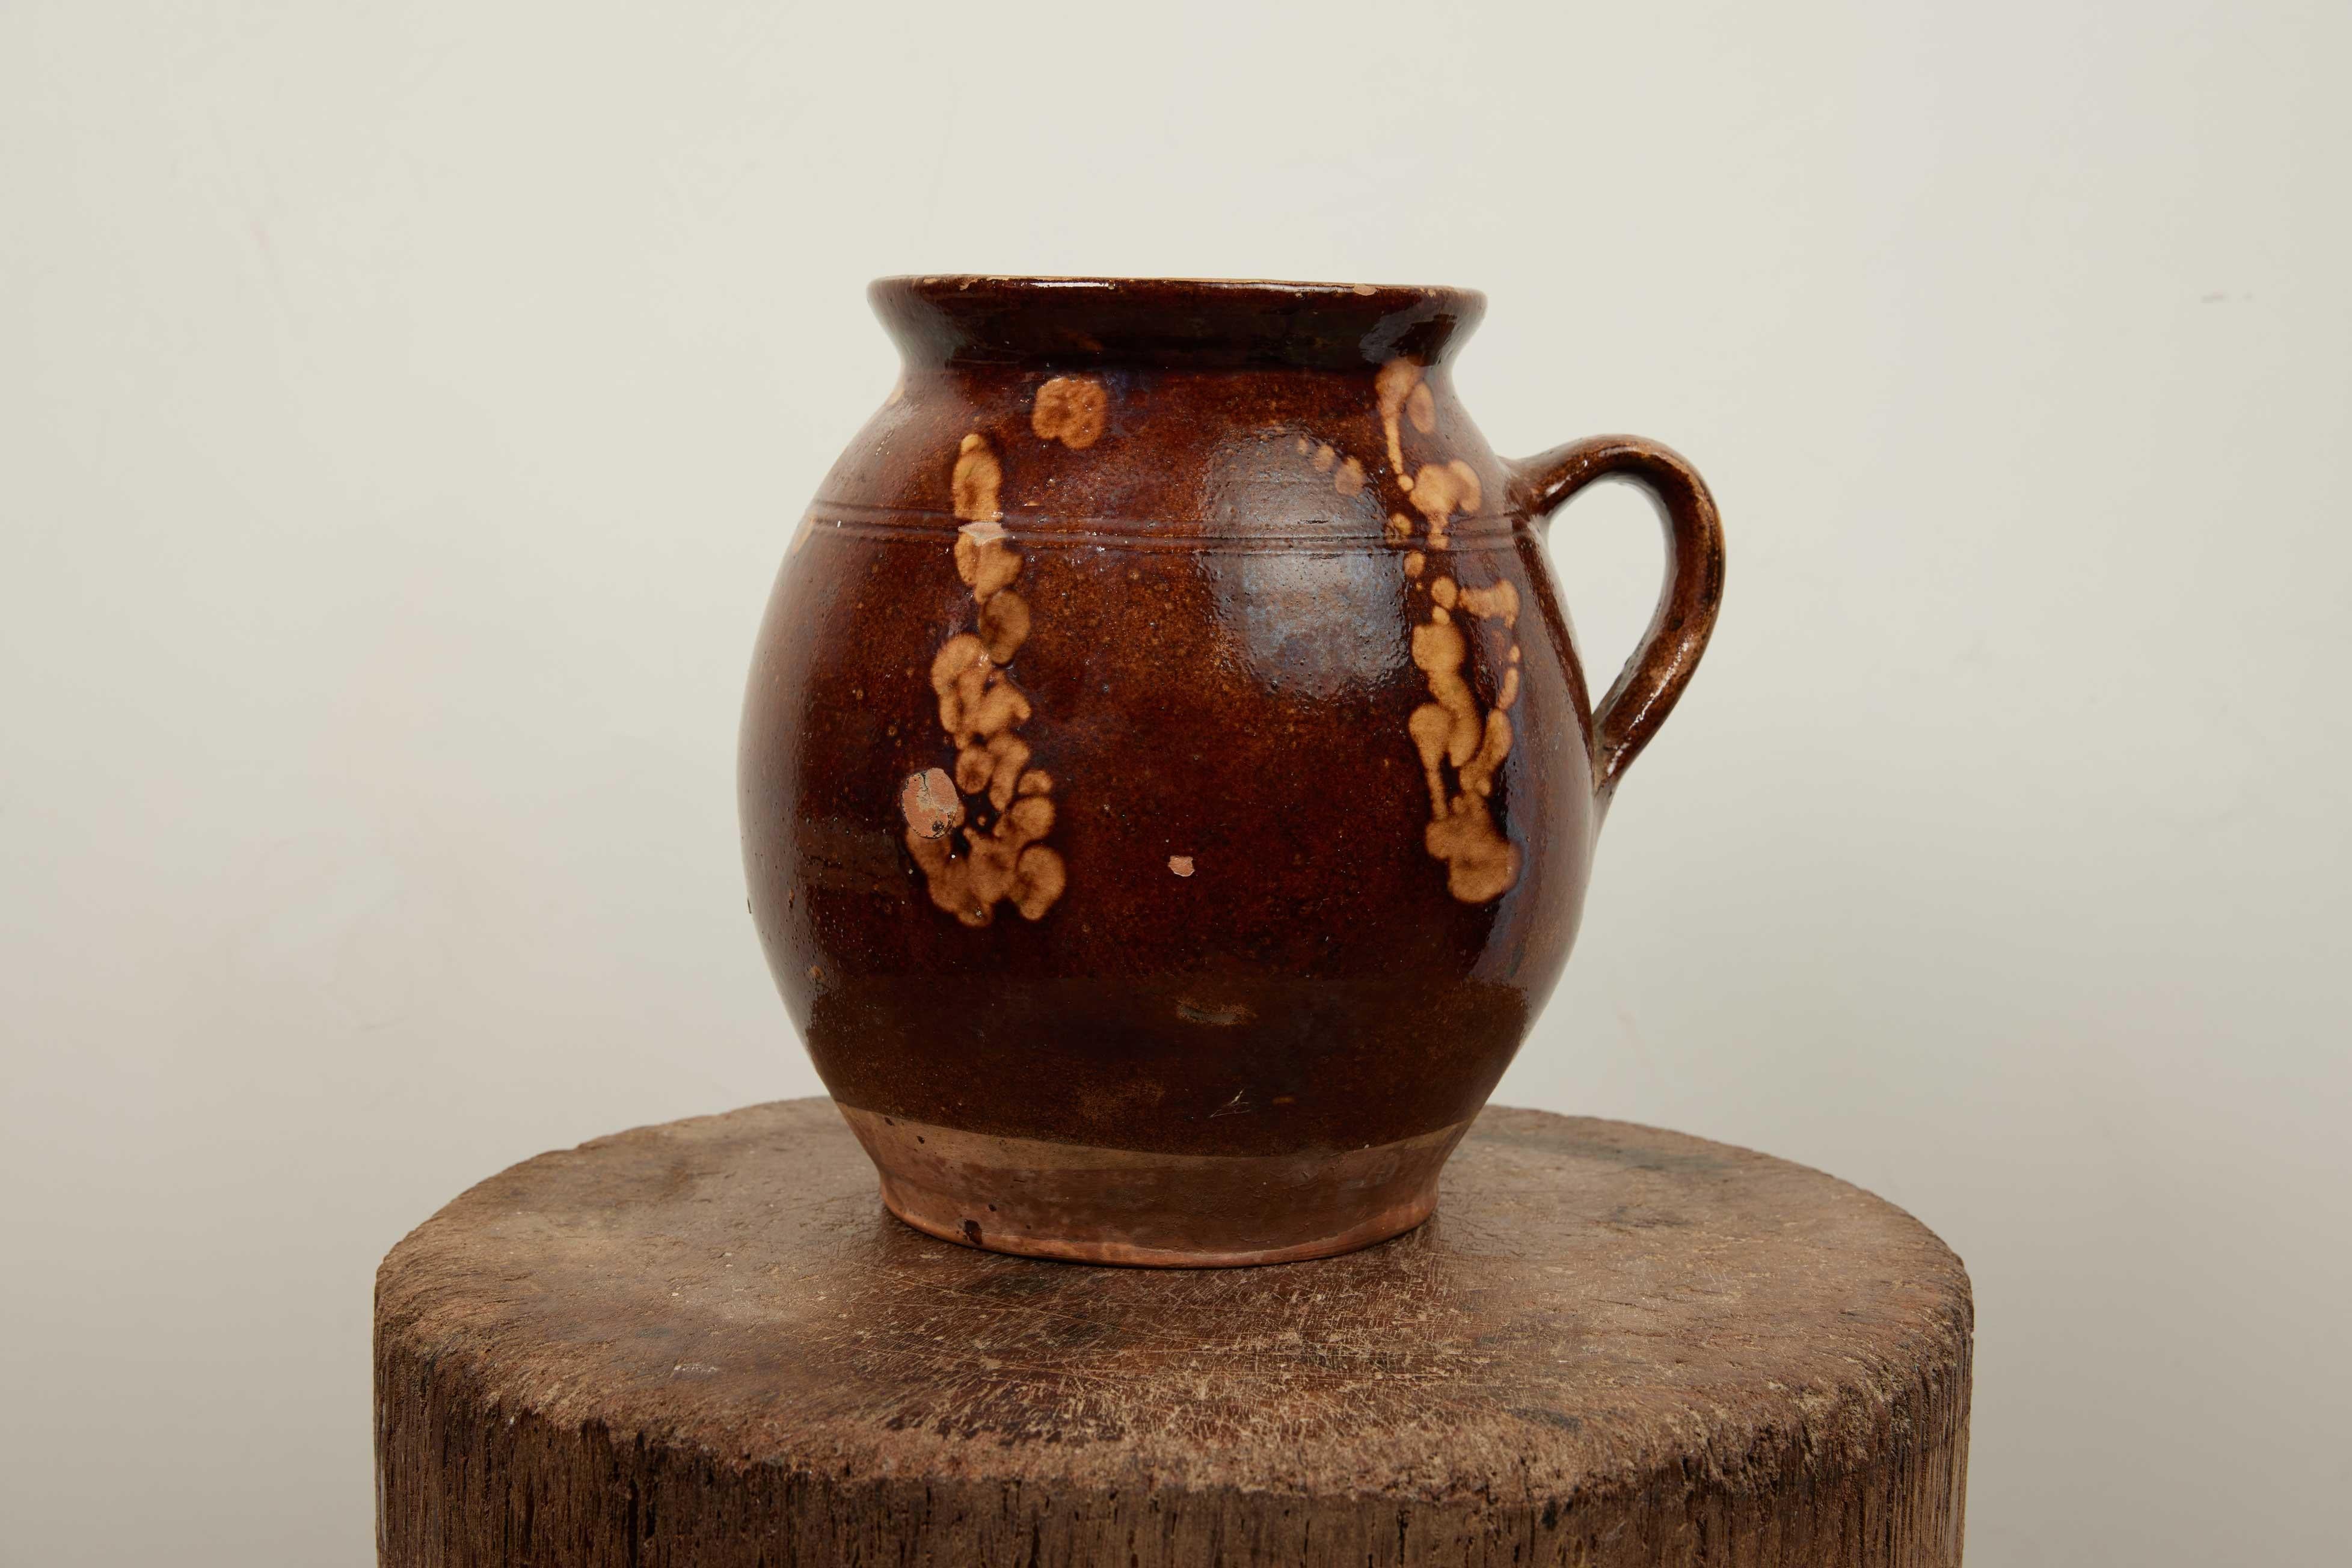 Earthenware Hungarian Pottery, circa 1900s


This 19th-century glazed dark brown Hungarian pottery piece is a charming 10